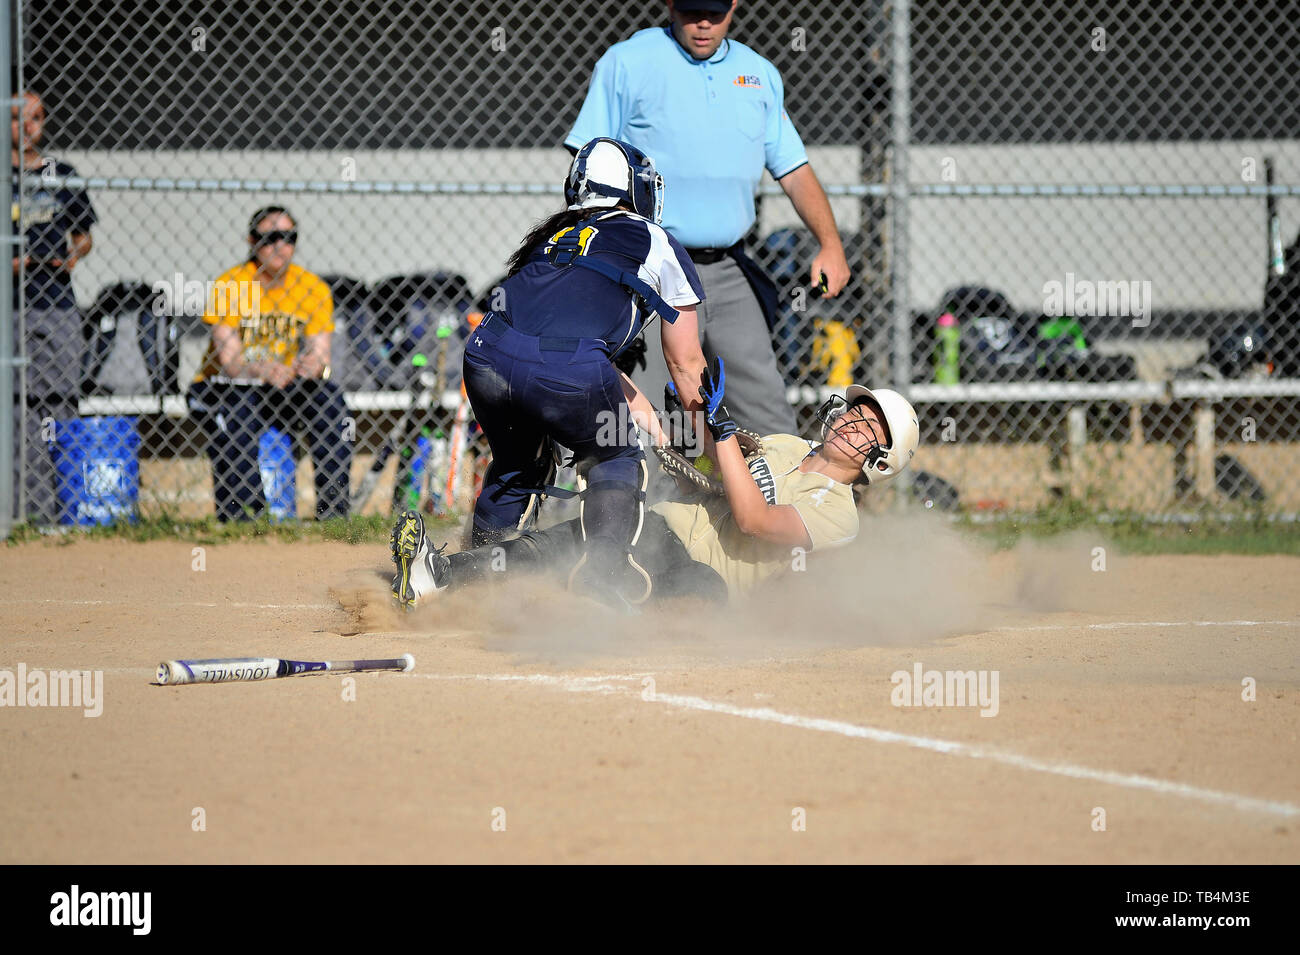 Catcher making a tag a base runner that was attempting to score. USA. Stock Photo